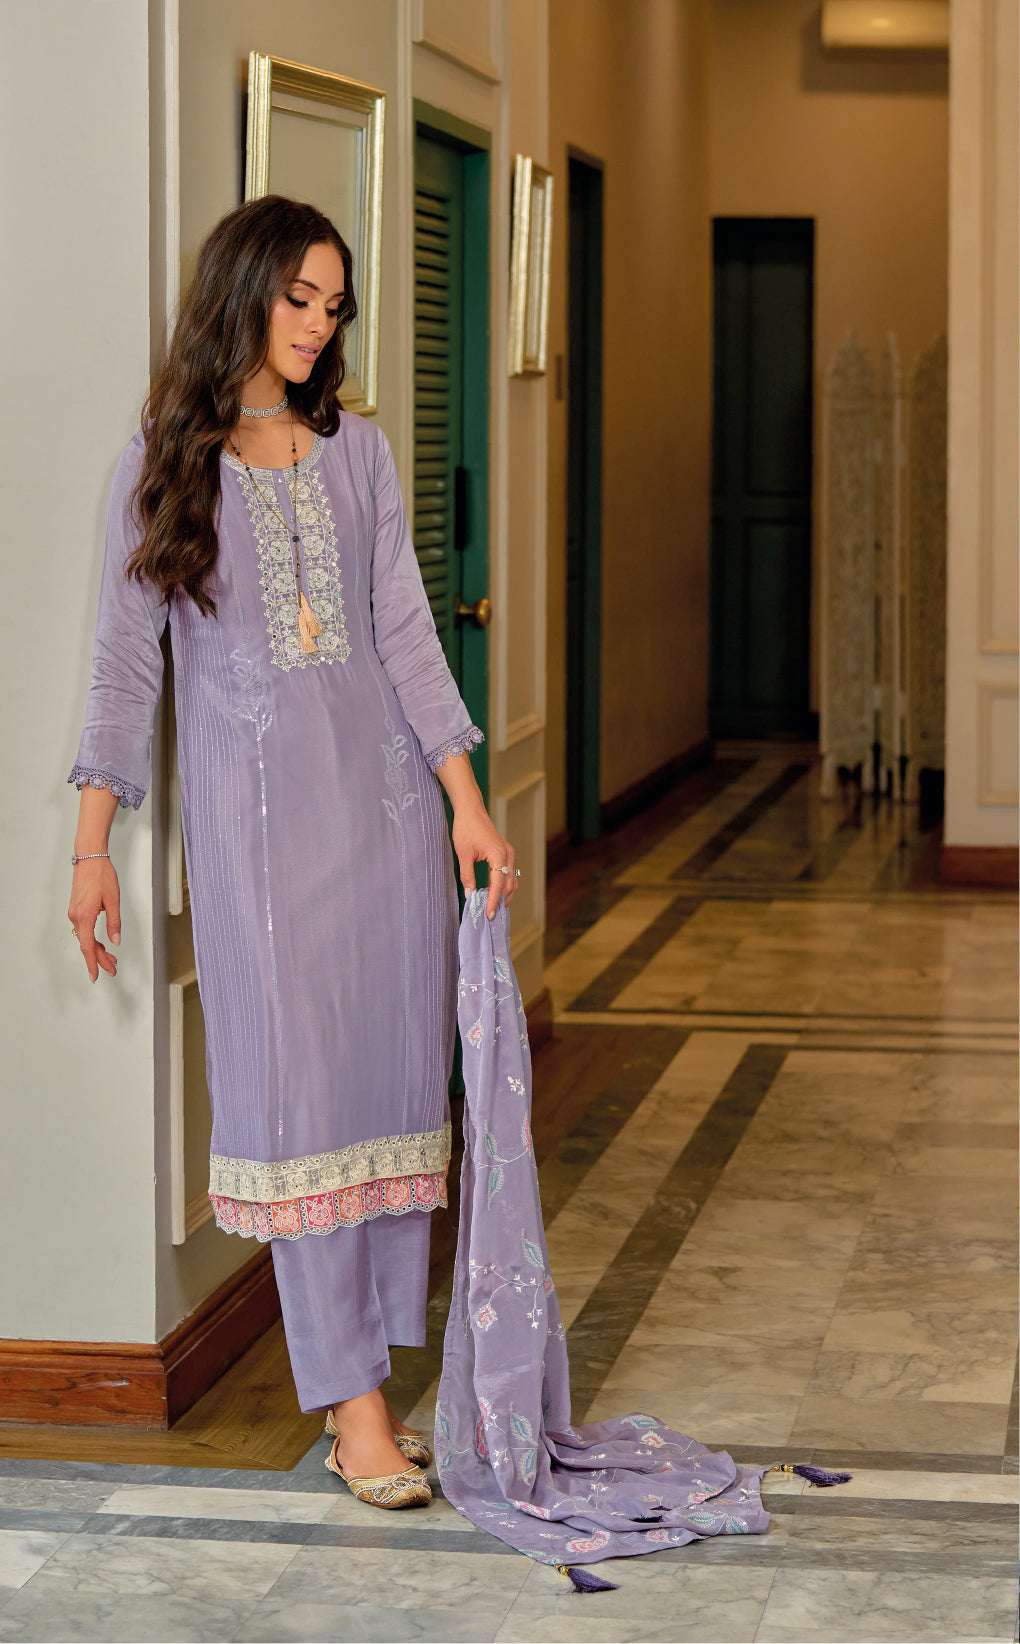 Elegant Purple Silk Salwar Suit with Exquisite Embroidery for Wedding & Parties